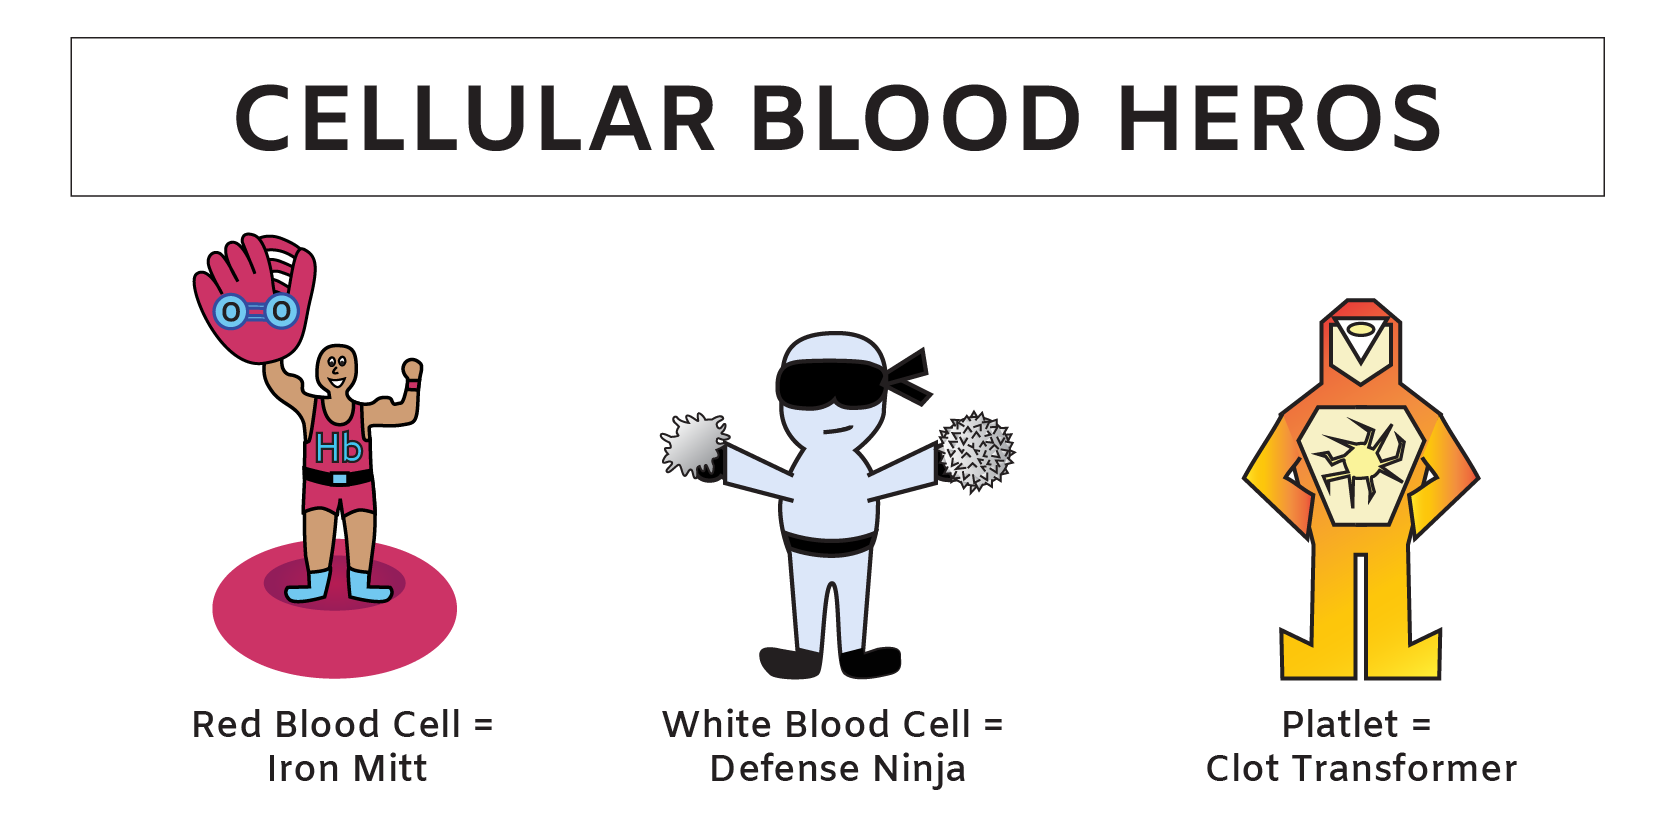 Blood cell types